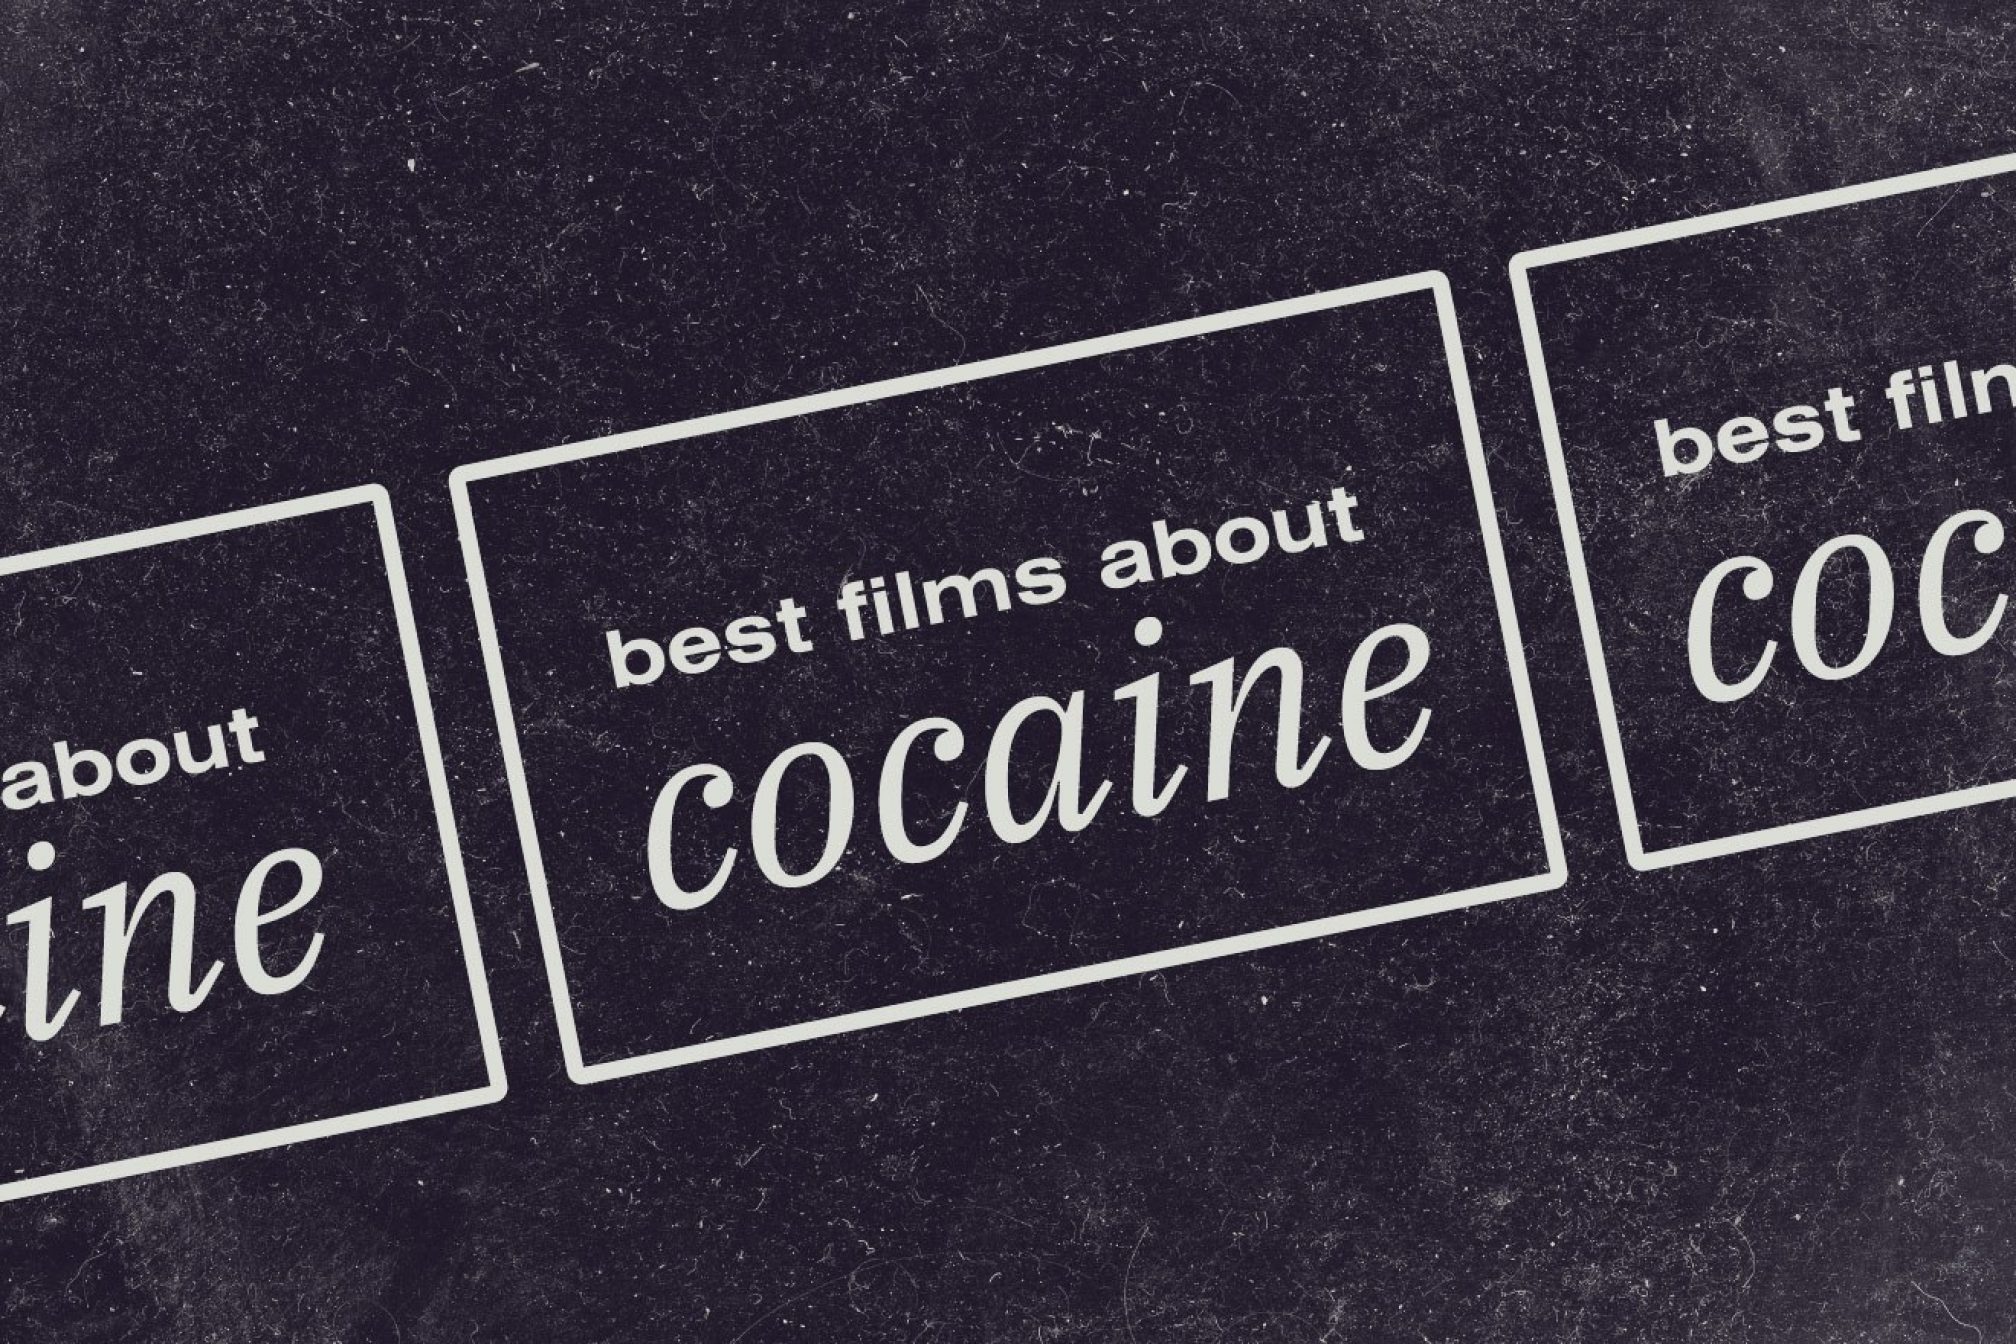 The 23 best films about cocaine - Features